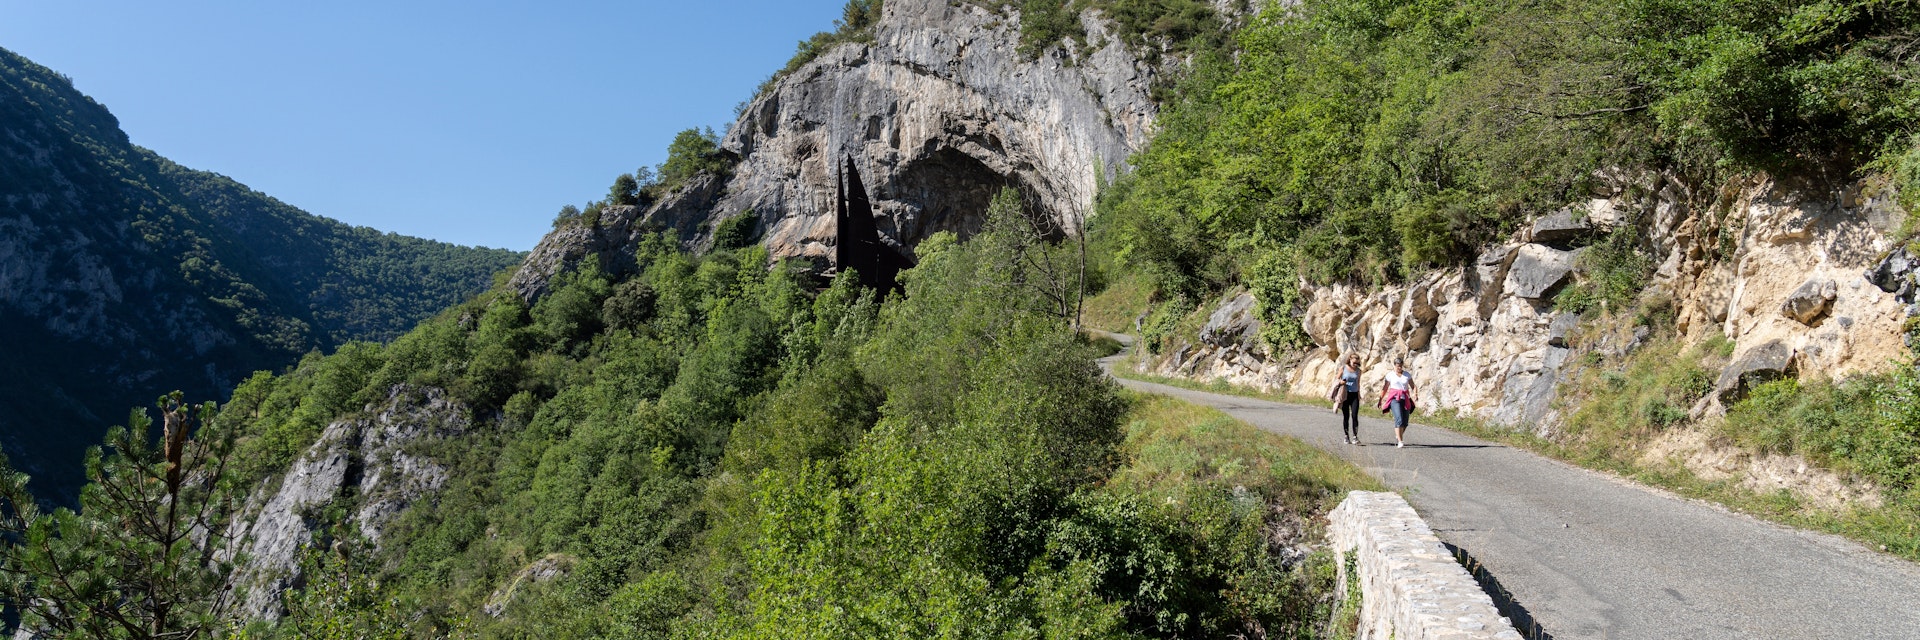 Eentrance of the cave of Niaux.